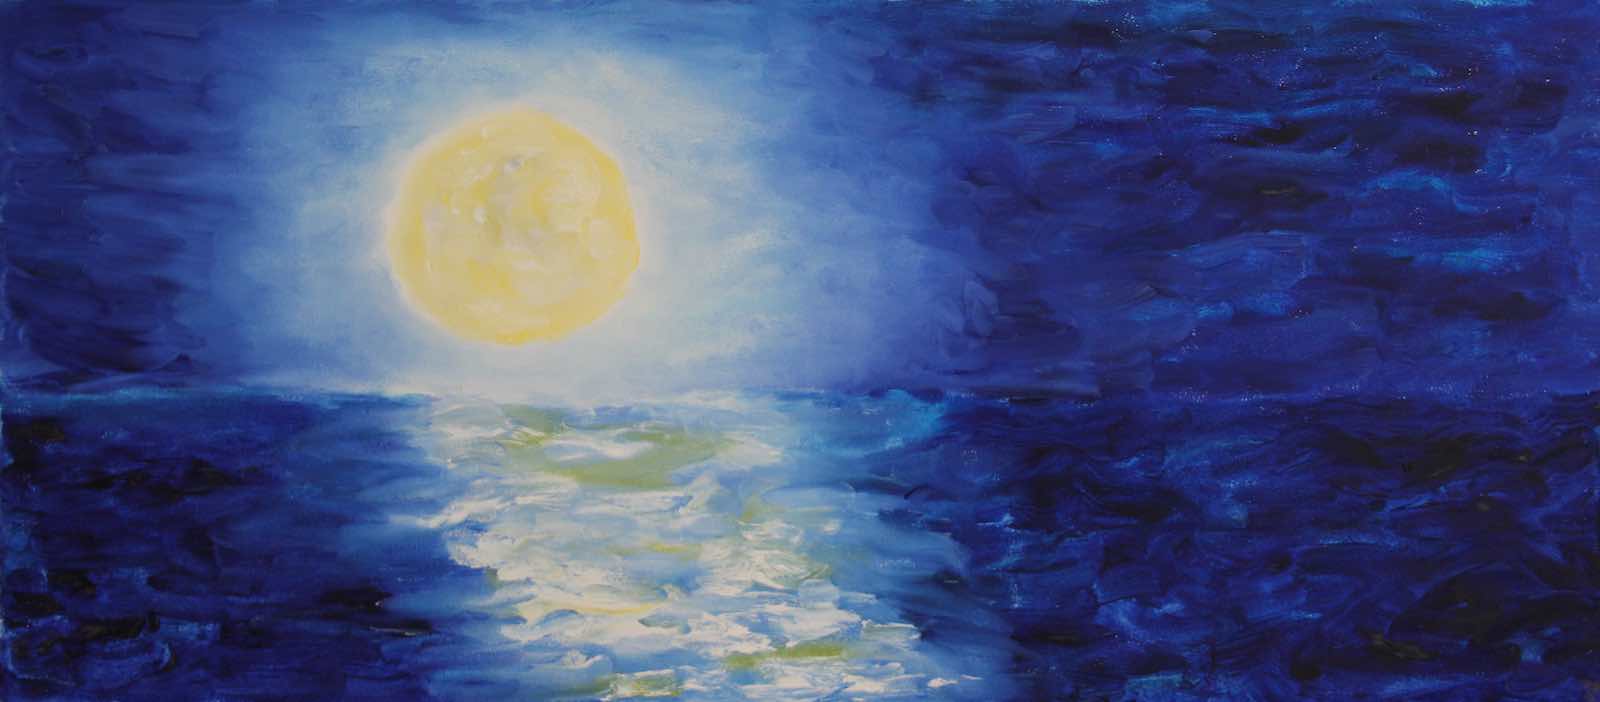 Oil painting of full Moon rising over dark blue Lake Michigan in Chicago